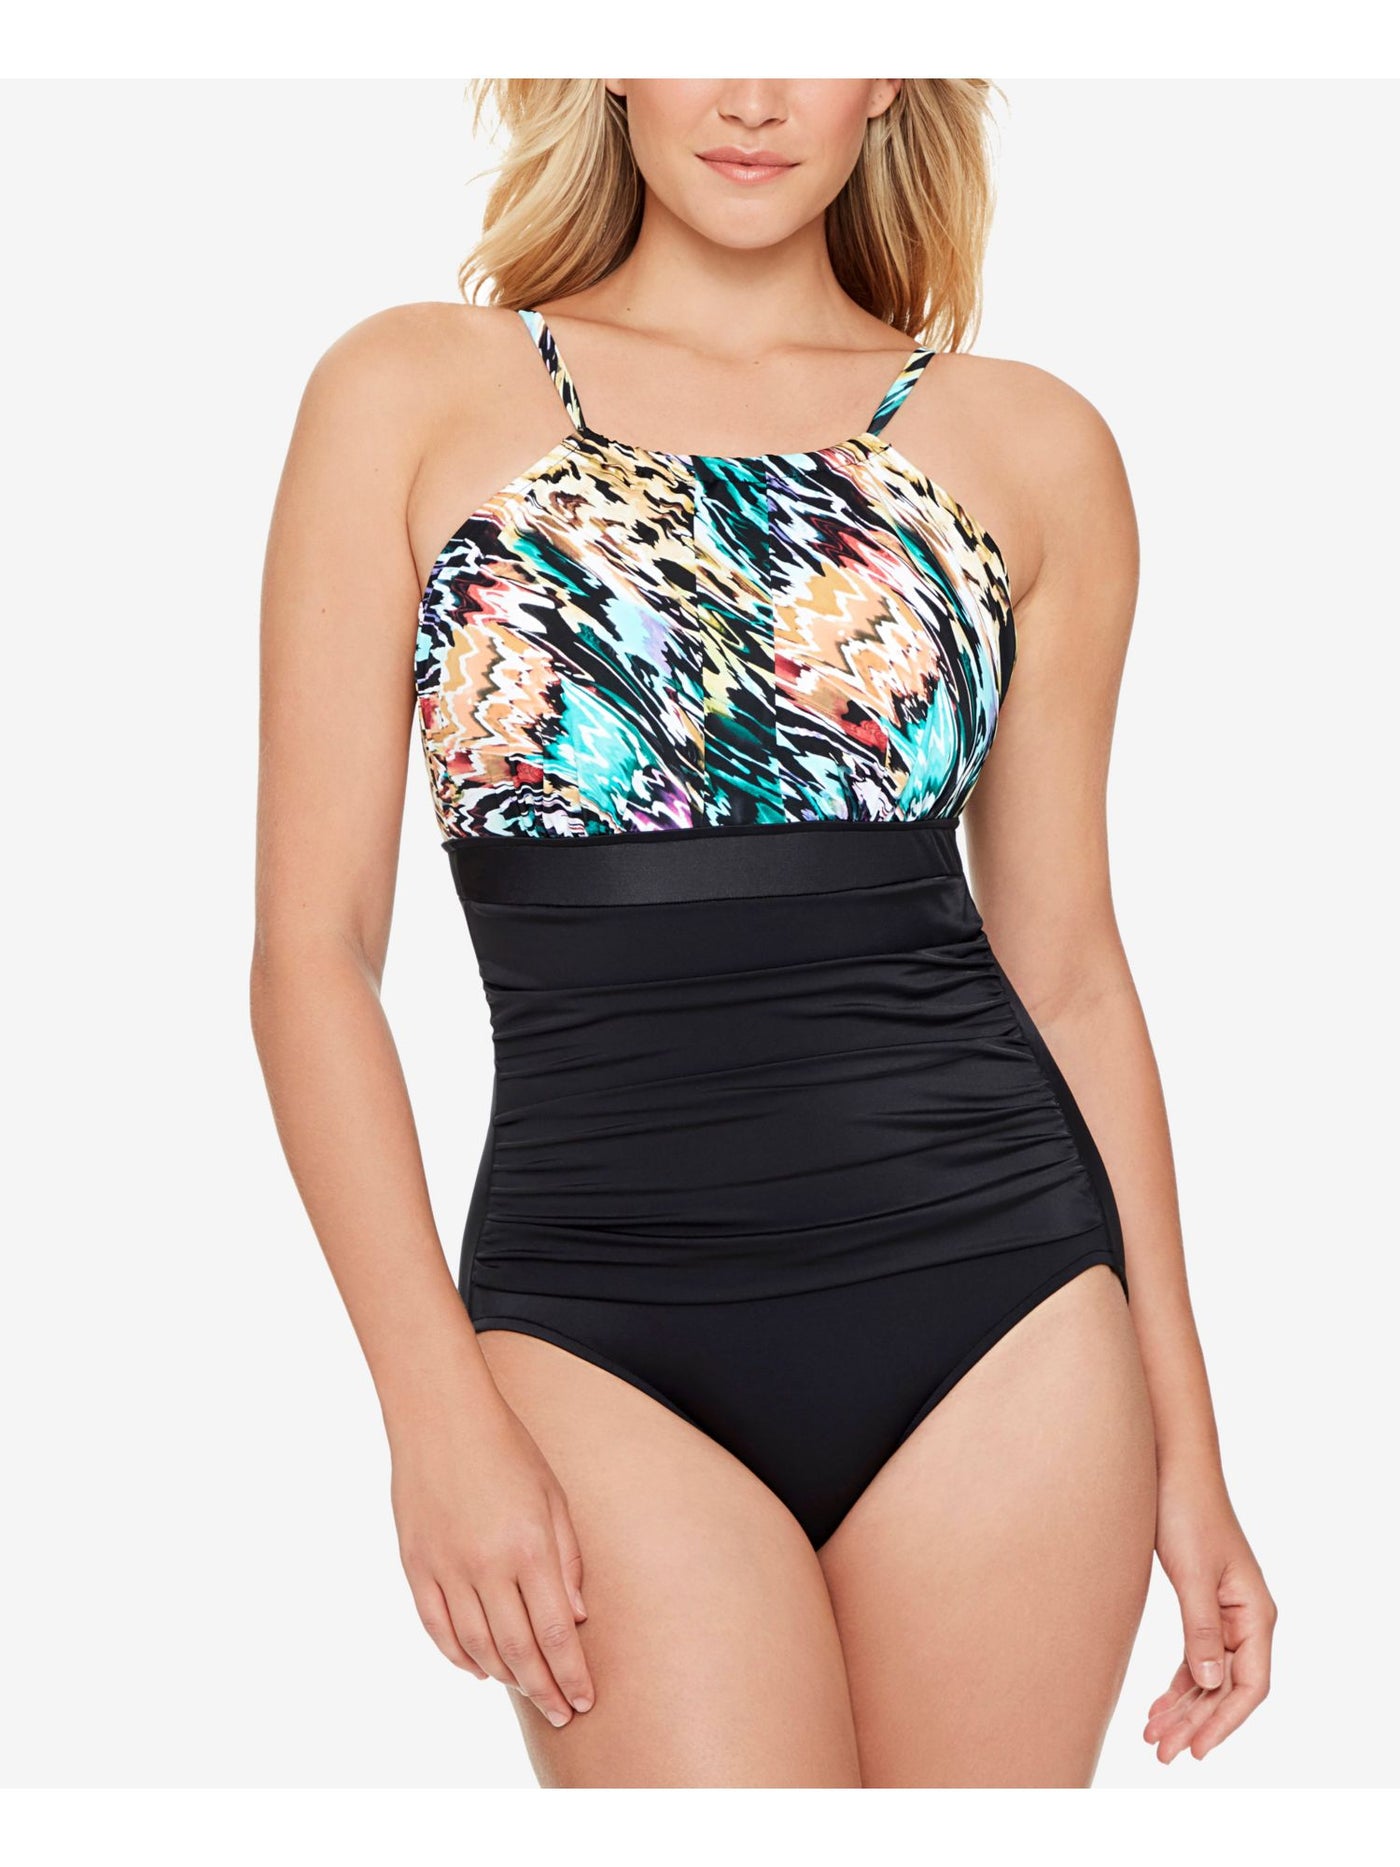 SWIM SOLUTIONS Women's Black Printed Allover Slimming Shirred Fixed Cups Adjustable Full Coverage High Neck One Piece Swimsuit 14